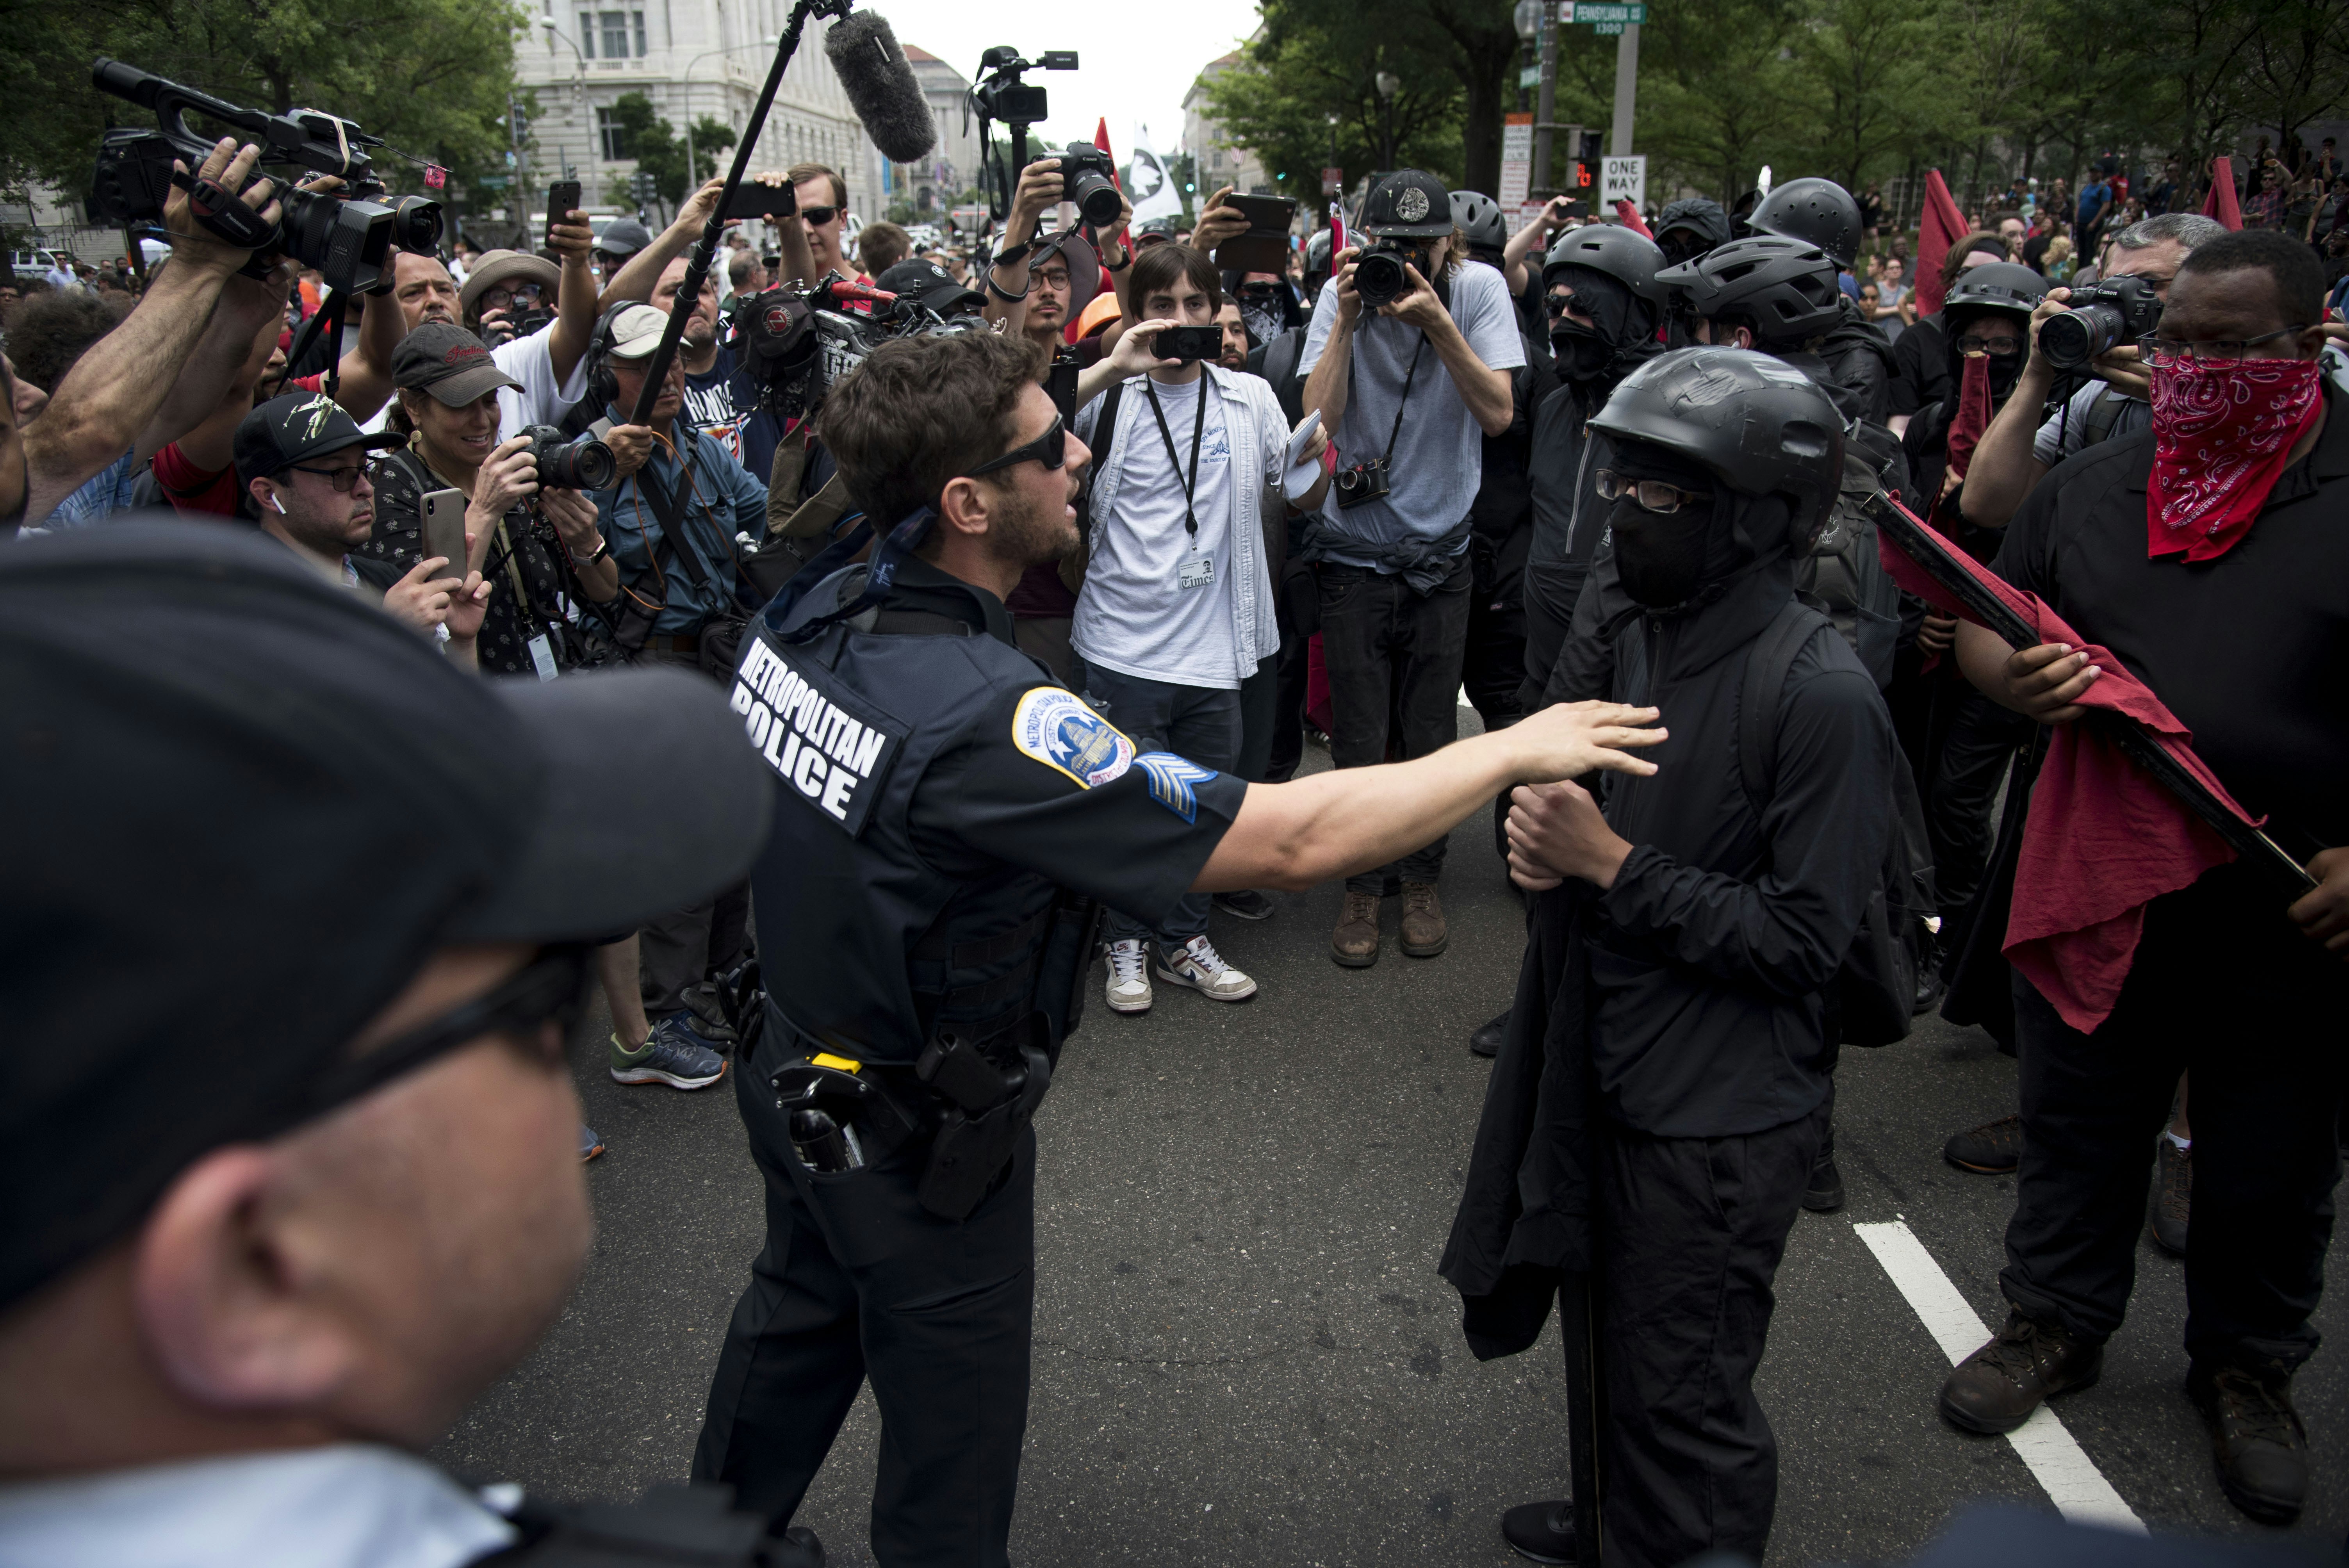 WASHINGTON, DC - JULY 6:  Police officer D.M. Thau talks to a member of Antifa after an Antifa clash with a Trump supporter outside Freedom Plaza during a Proud Boys rally and an All Out D.C. rally on July 6, 2019 in Washington, DC. (Photo by Marlena Sloss/The Washington Post via Getty Images)